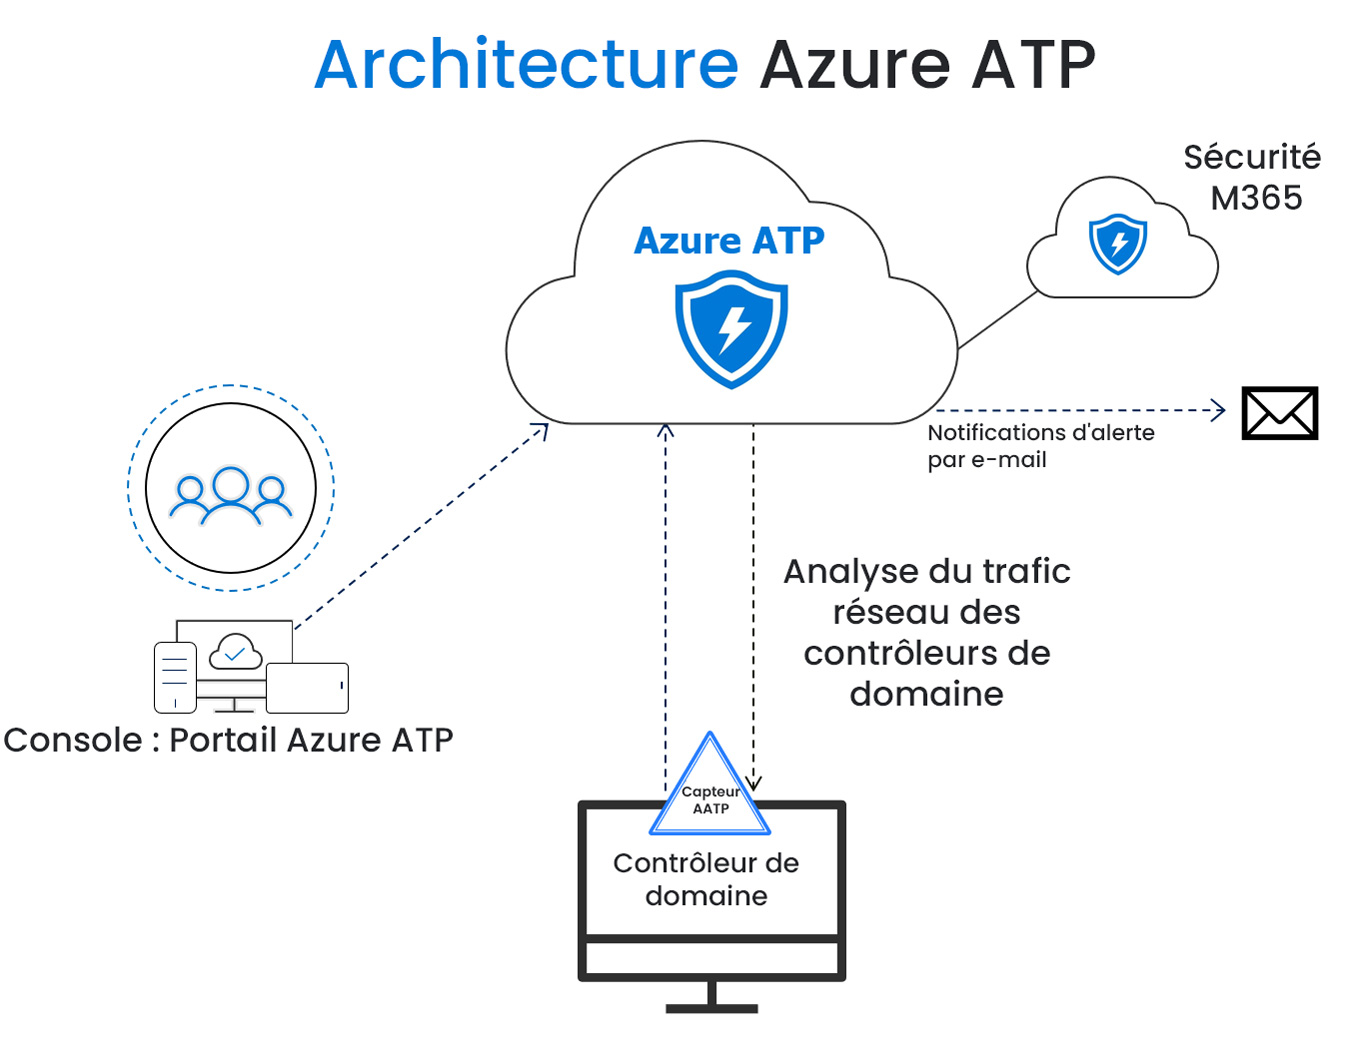 Azure Advanced Threat Protection